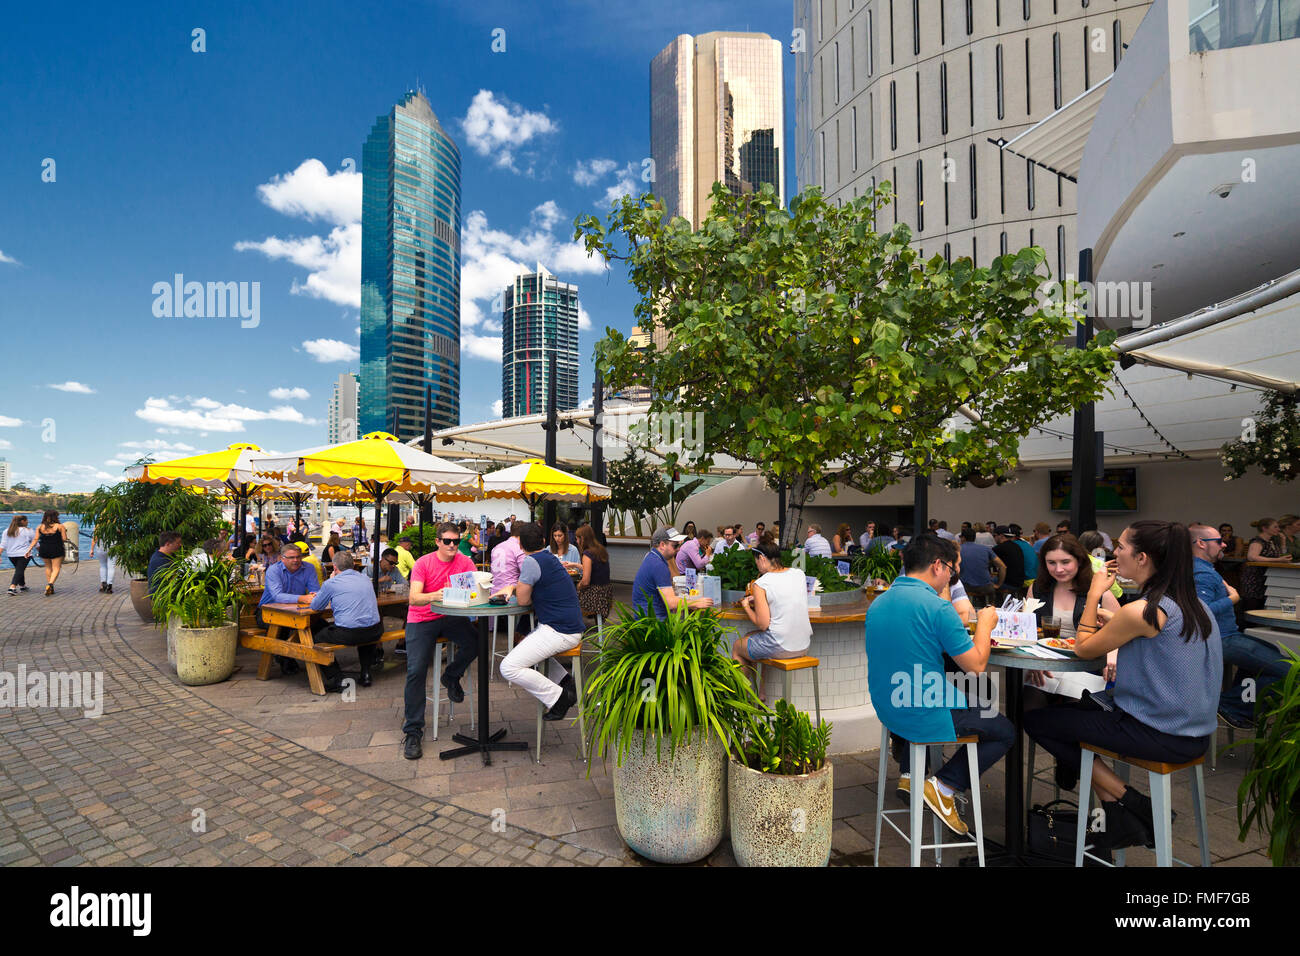 Al fresco lunchtime diners on the riverside walk at Eagle street pier Brisbane with high rise buildings / skyscrapers Stock Photo